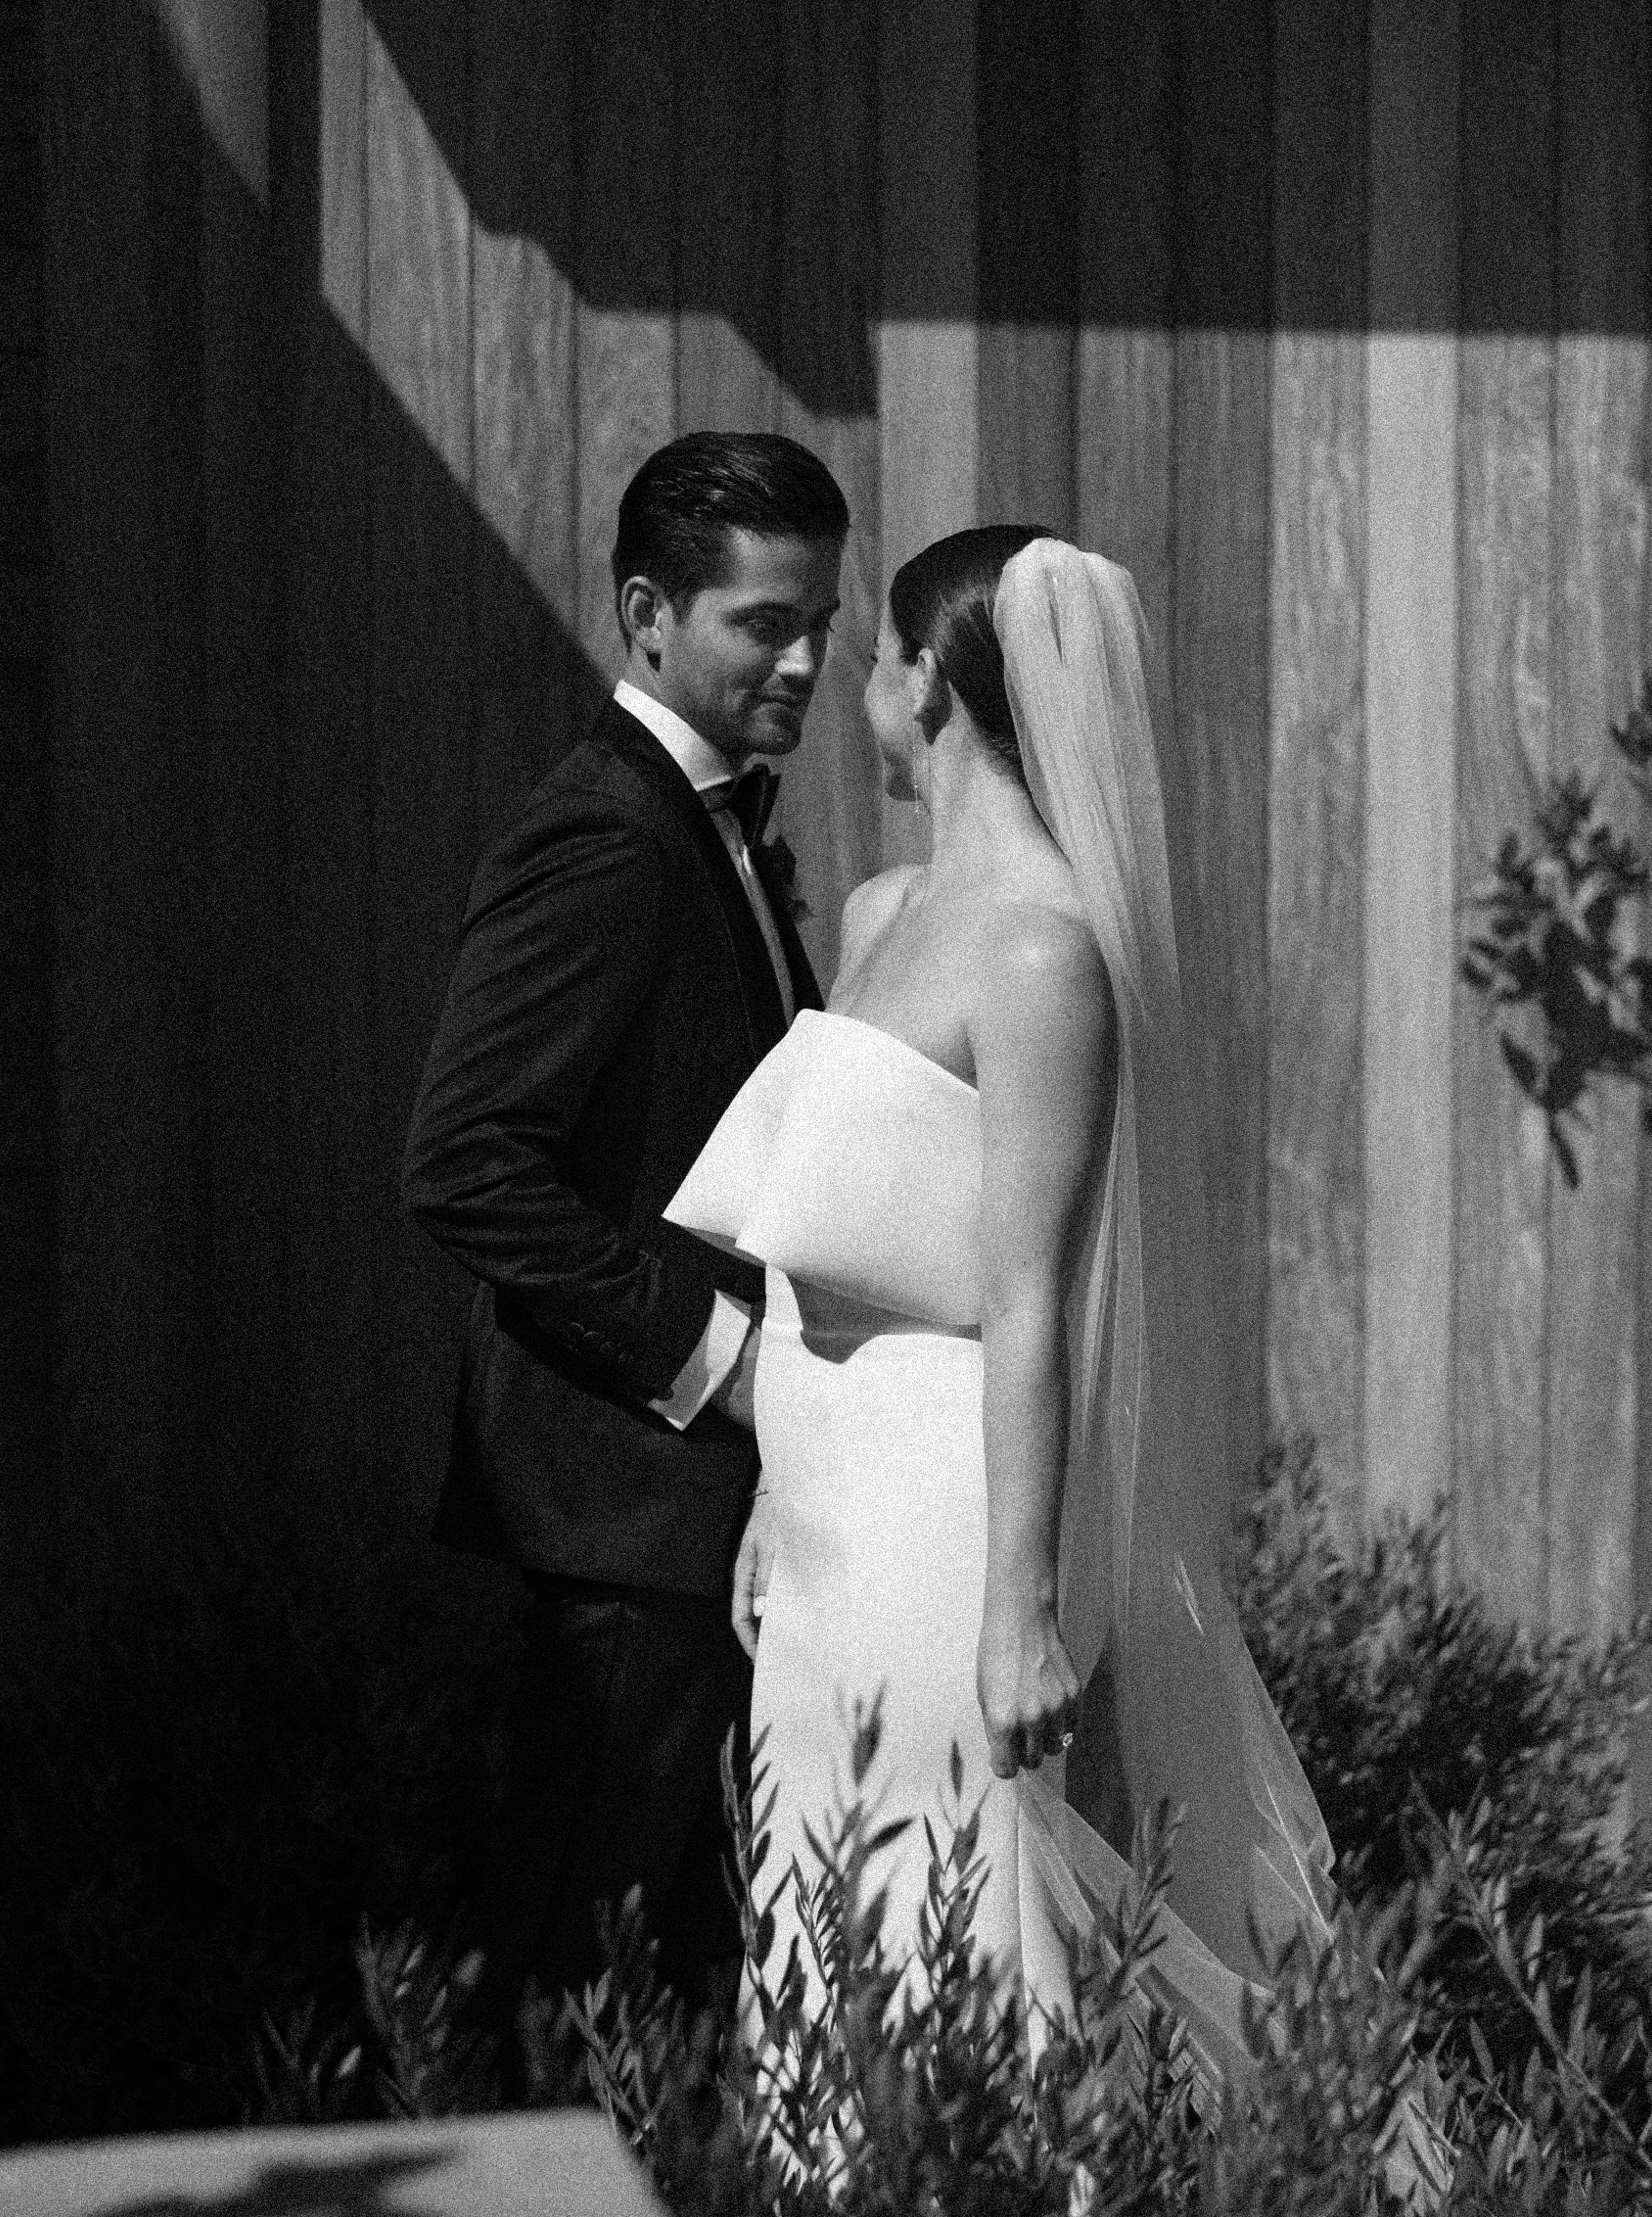 Black and white editorial wedding photograph of bride and groom. Groom is wearing a black tuxedo and standing int he shadow. Bride is wearing a white wedding dress and standing in the sun. Yin and Yang wedding photos.